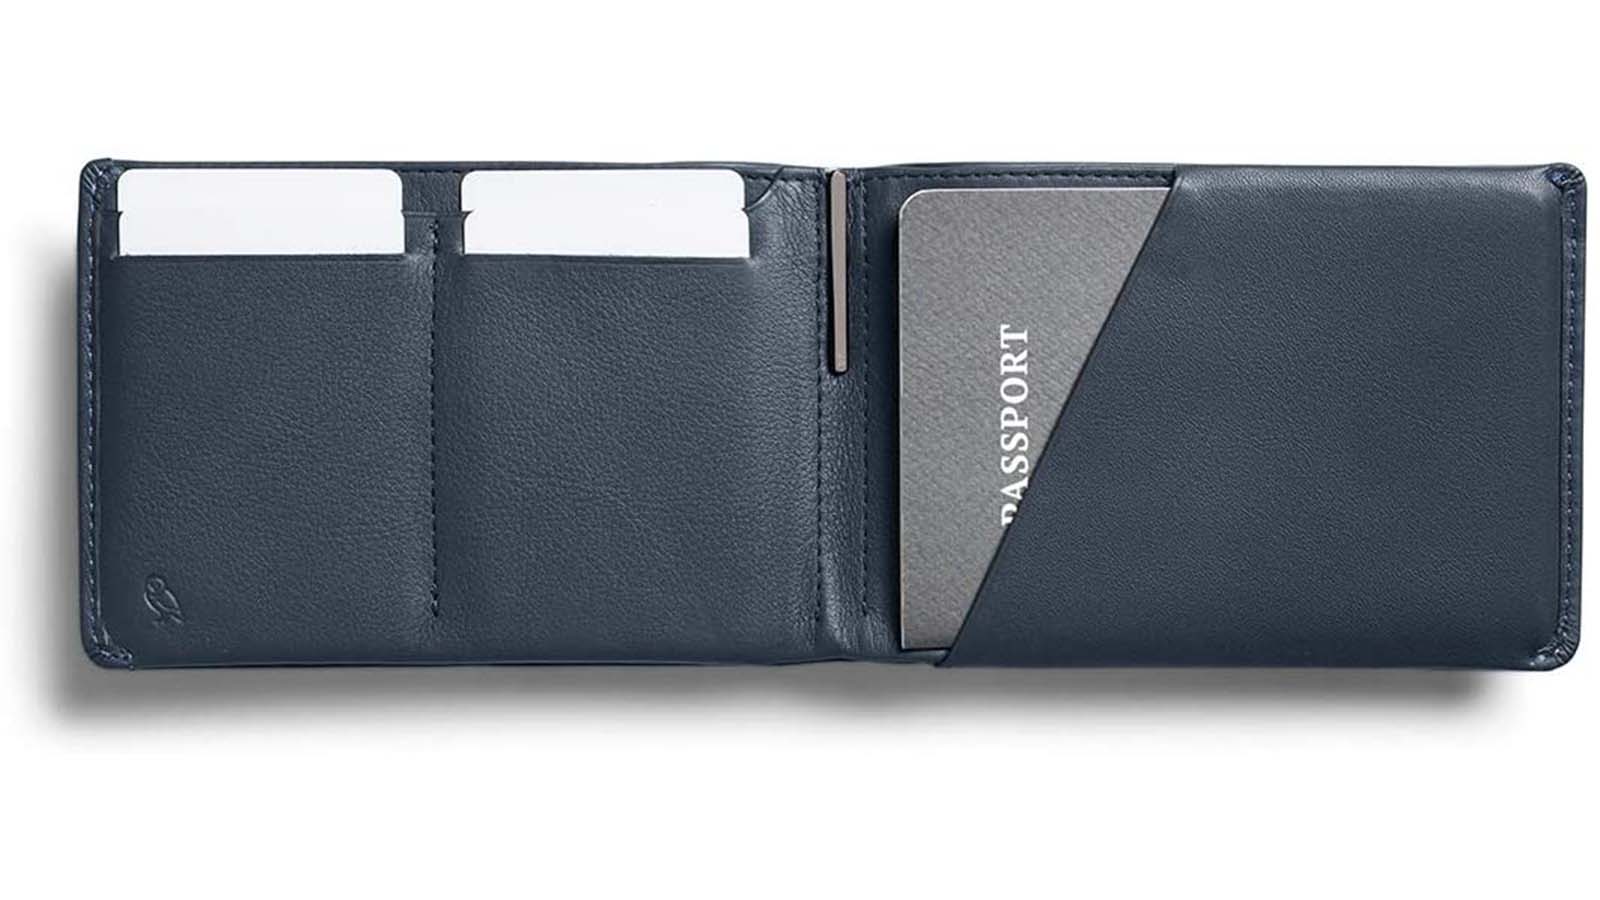 6 Best Travel Wallets of 2023 - Reviewed